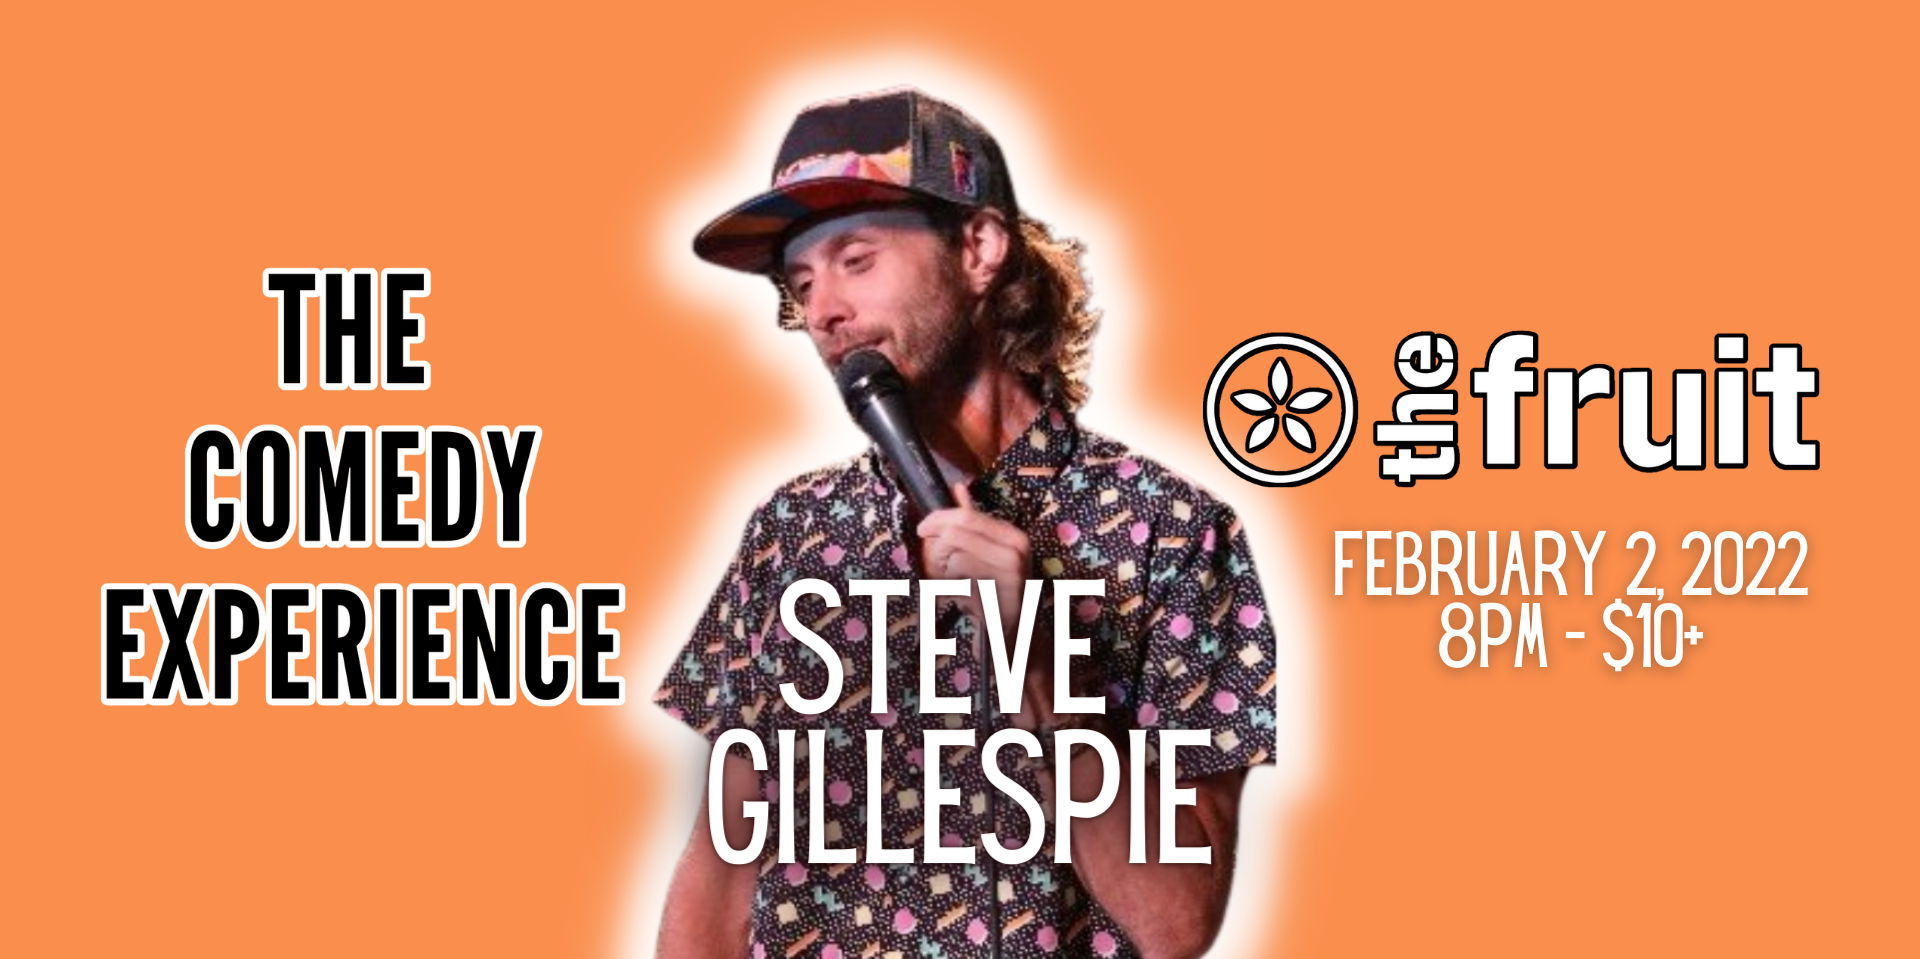 The Comedy Experience: Steve Gillespie @ The Fruit in Durham promotional image